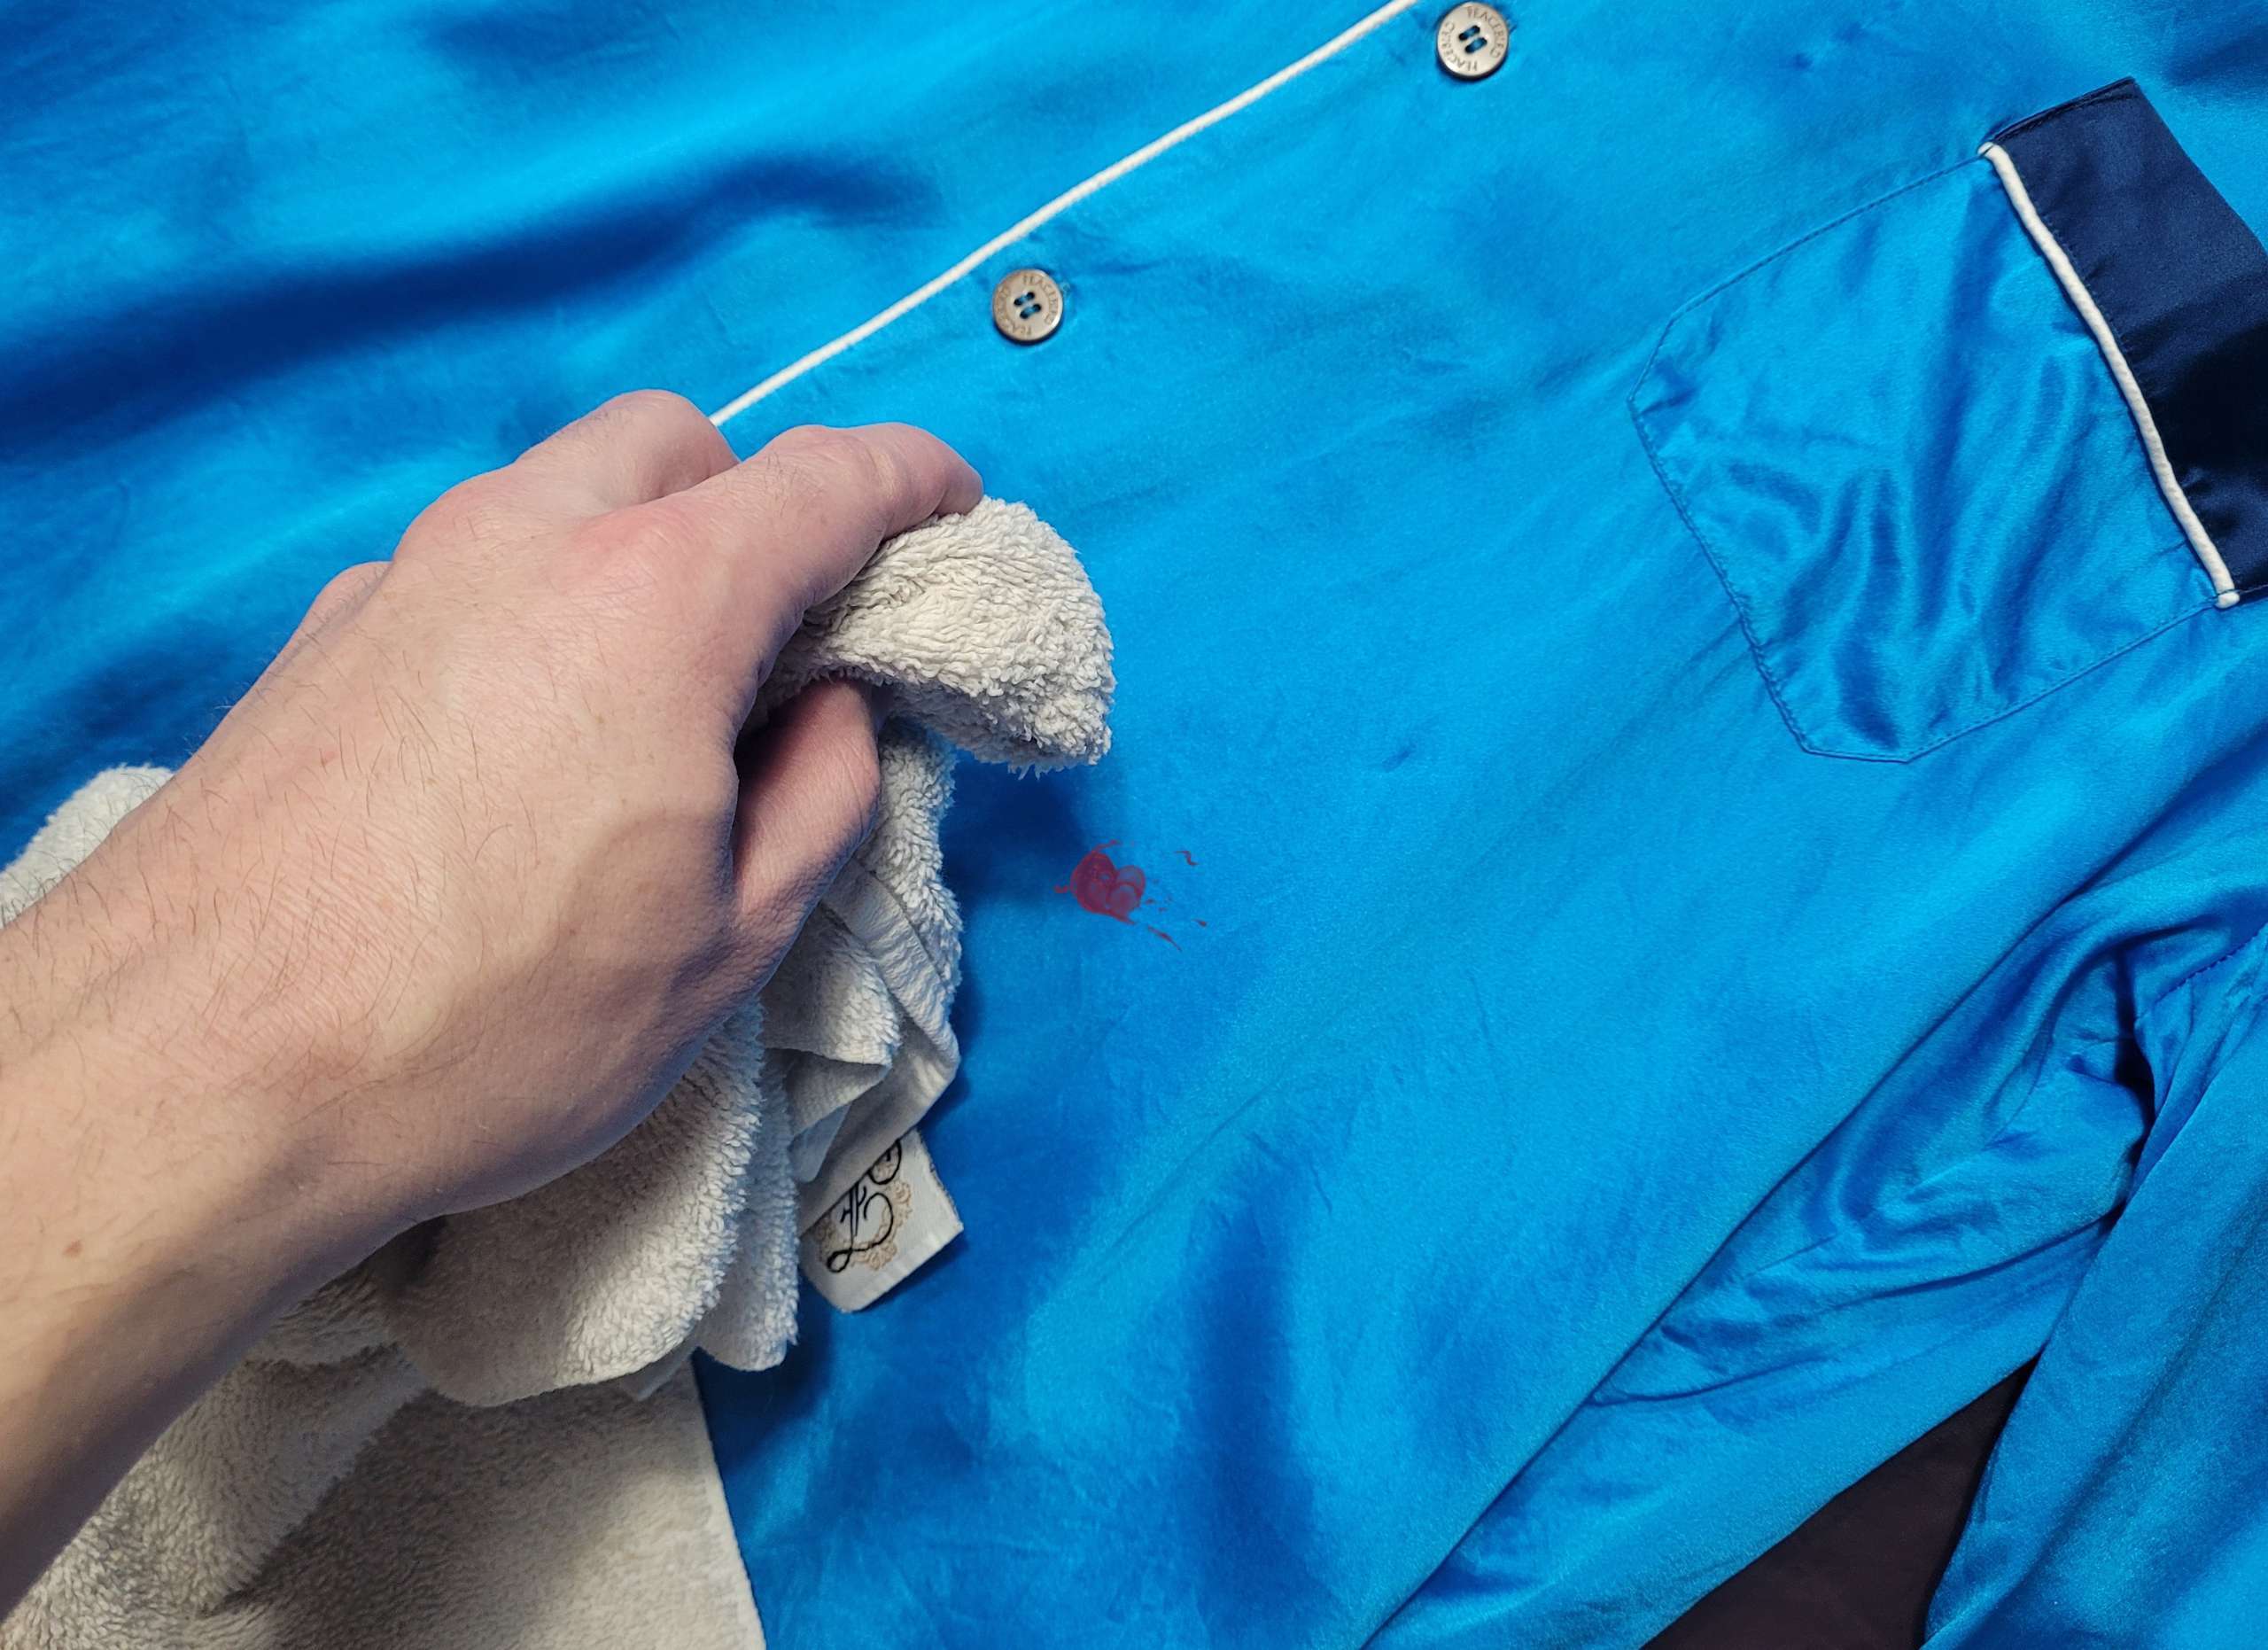 a photo showing a man using a cloth to dab a stain off of a blue silk shirt